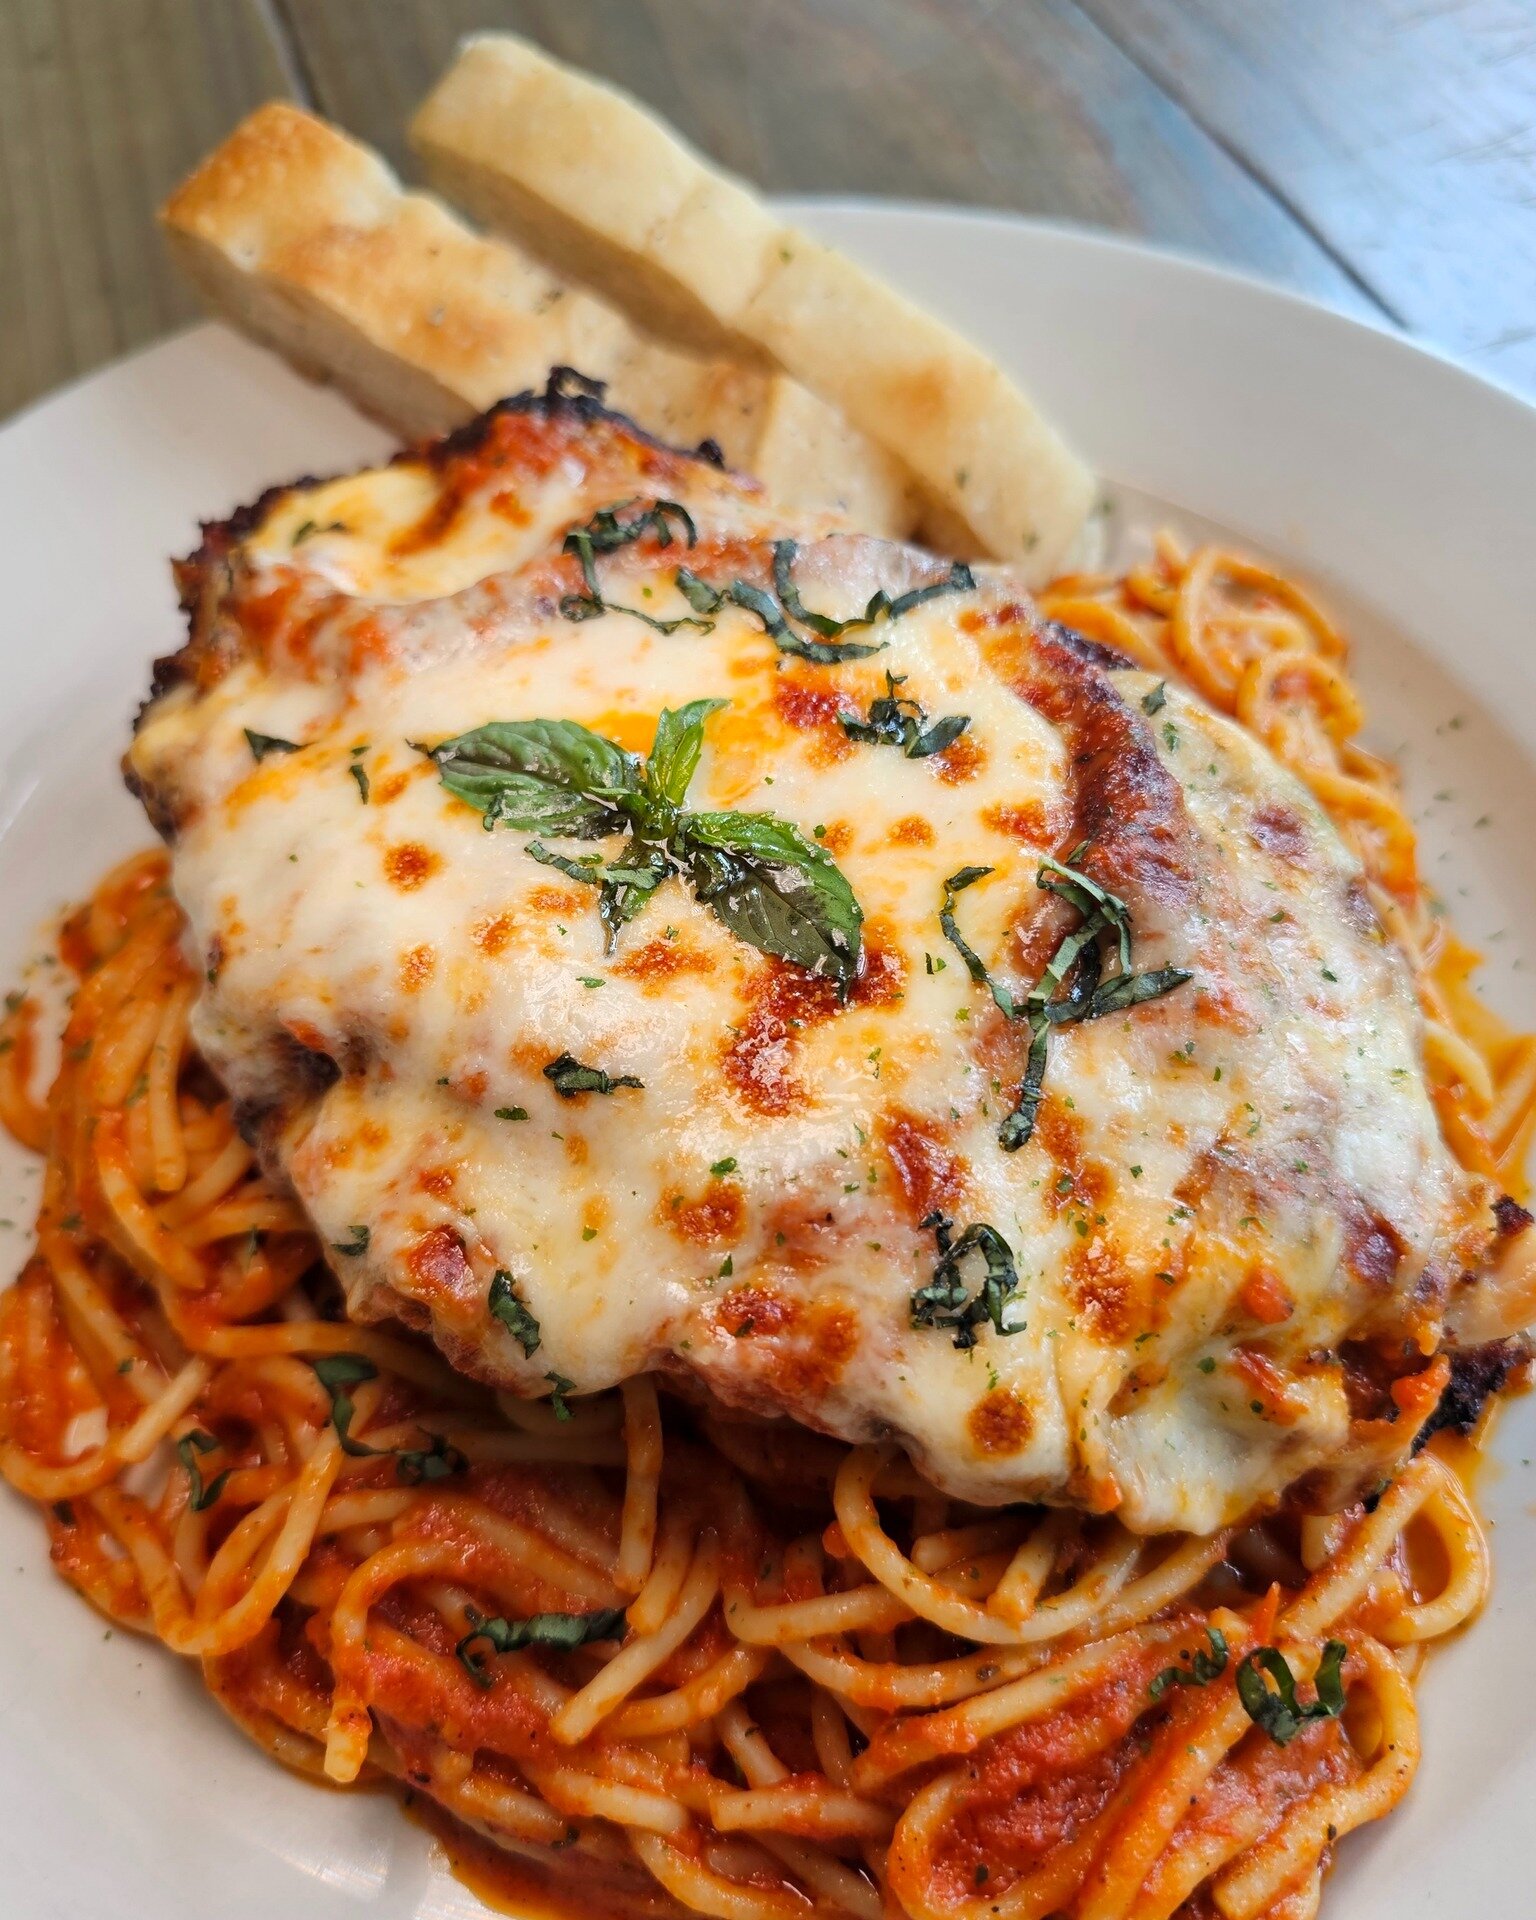 Arte's Chicken Parmigiana is one of our most popular menu items! We start with a tenderized chicken breast that is hand breaded and pan fried, and then covered in marinara, mozzarella, and served with spaghetti or fresh vegetables. Perfect for lunch 